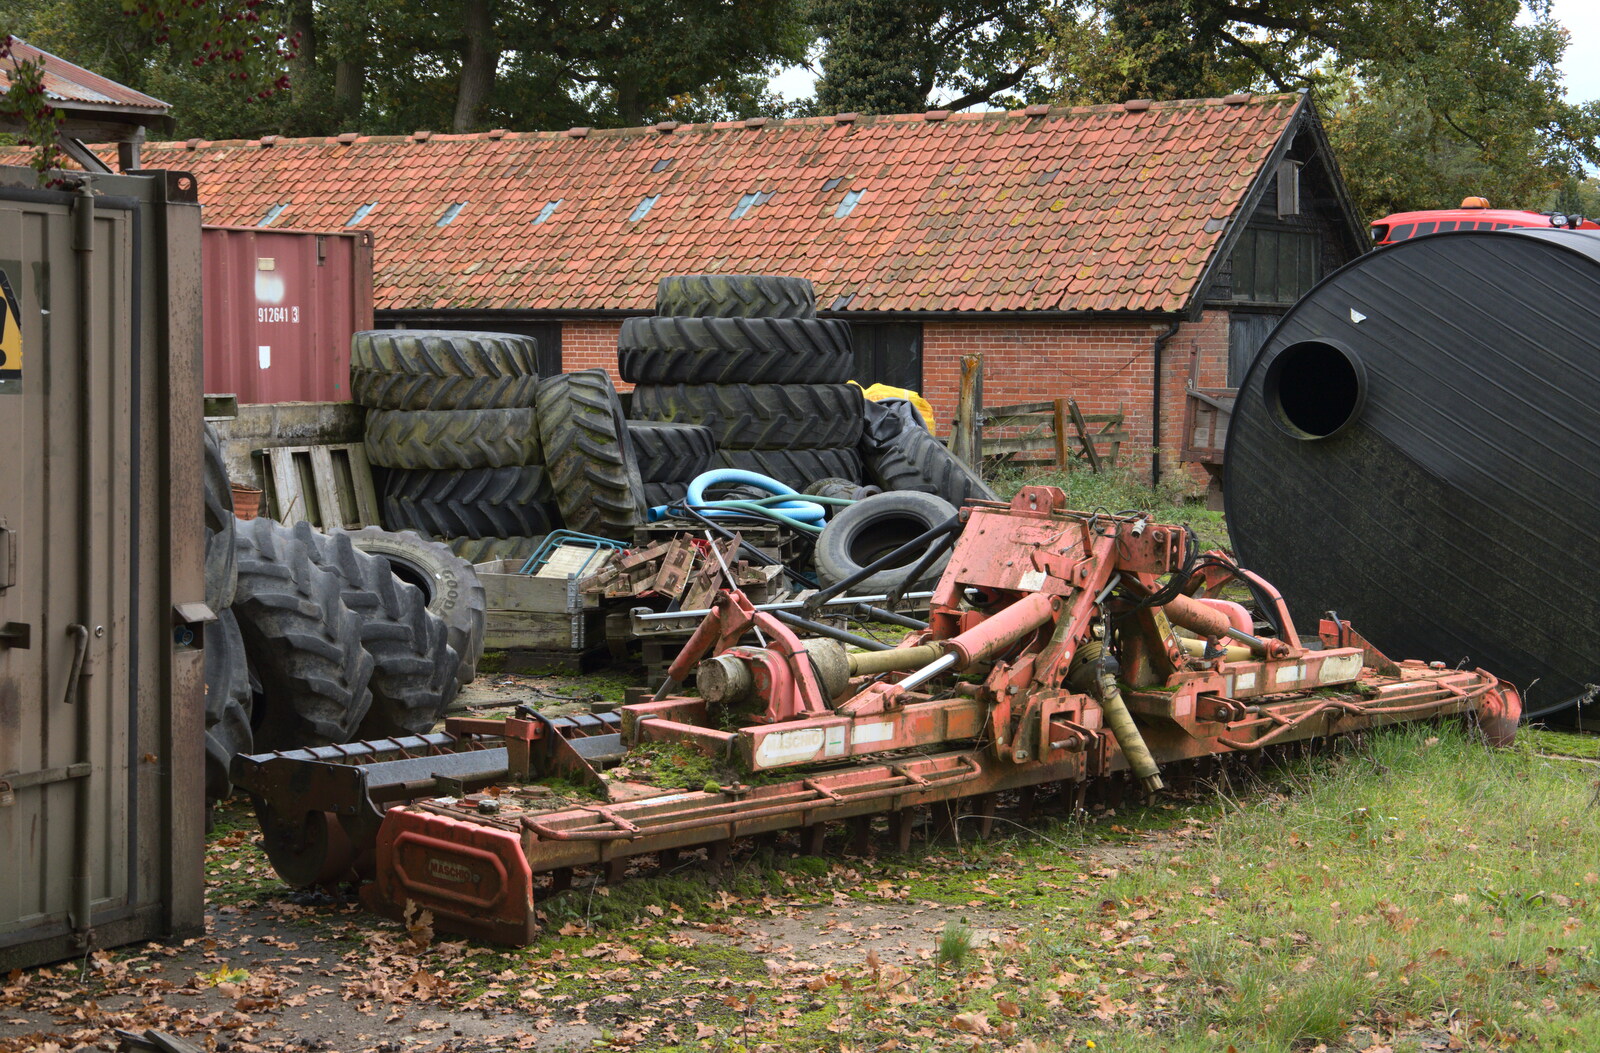 A massive pile of tyres and some farm machinery from A Walk Around Thornham Estate, Thornham Magna, Suffolk - 18th October 2020